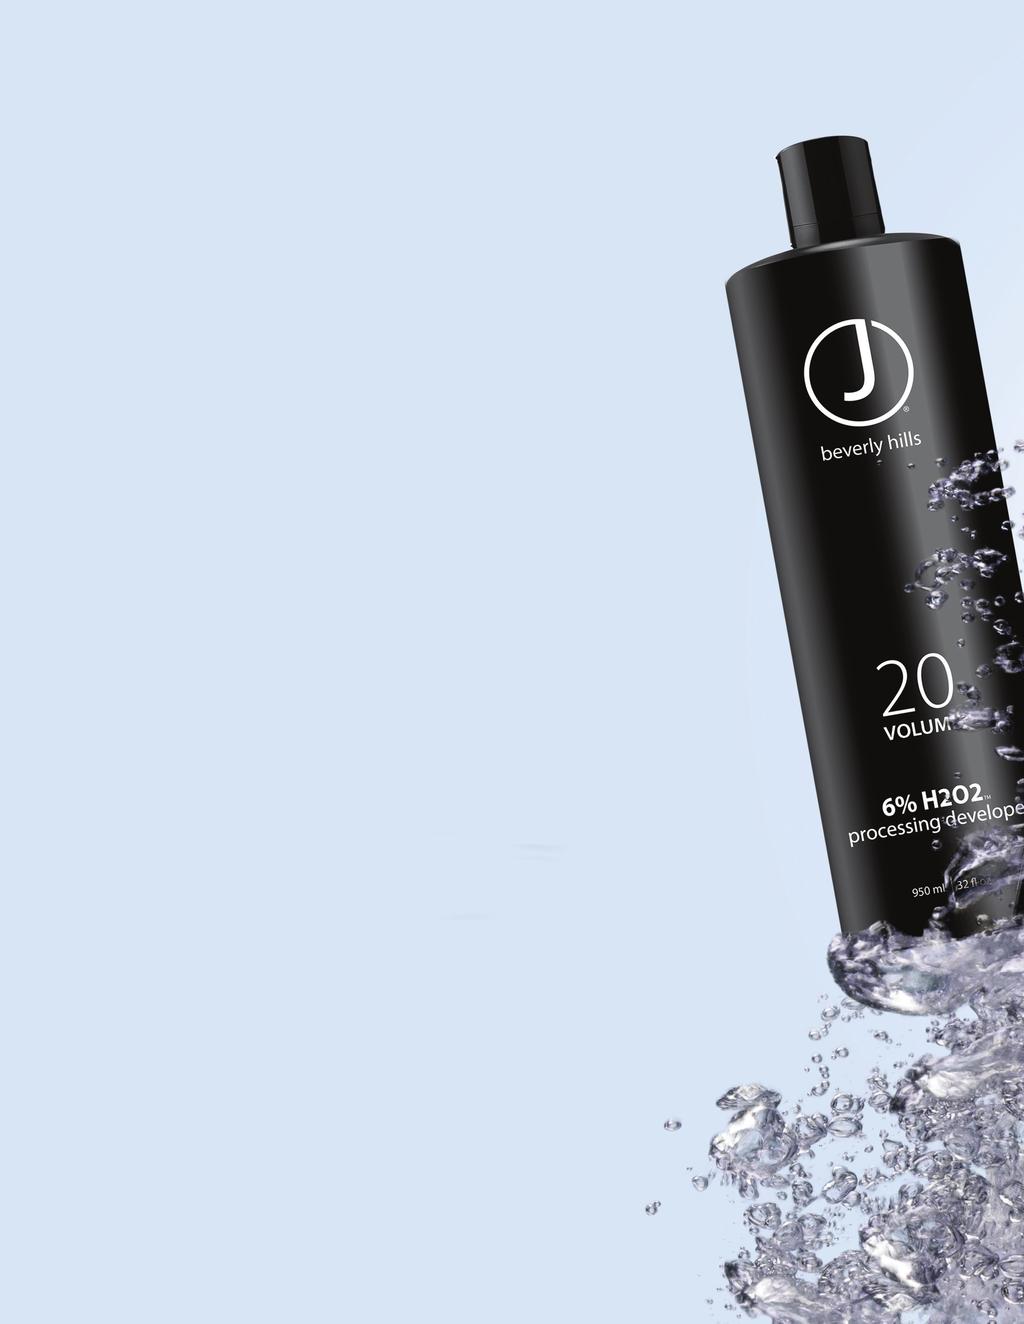 H 2O 2 D EV ELO P ERS 12 H2O2 Developers J Beverly Hills H2O2 Developer is a hydrogen peroxide designed to be mixed with the J Beverly Hills Colour tubes and lighteners.